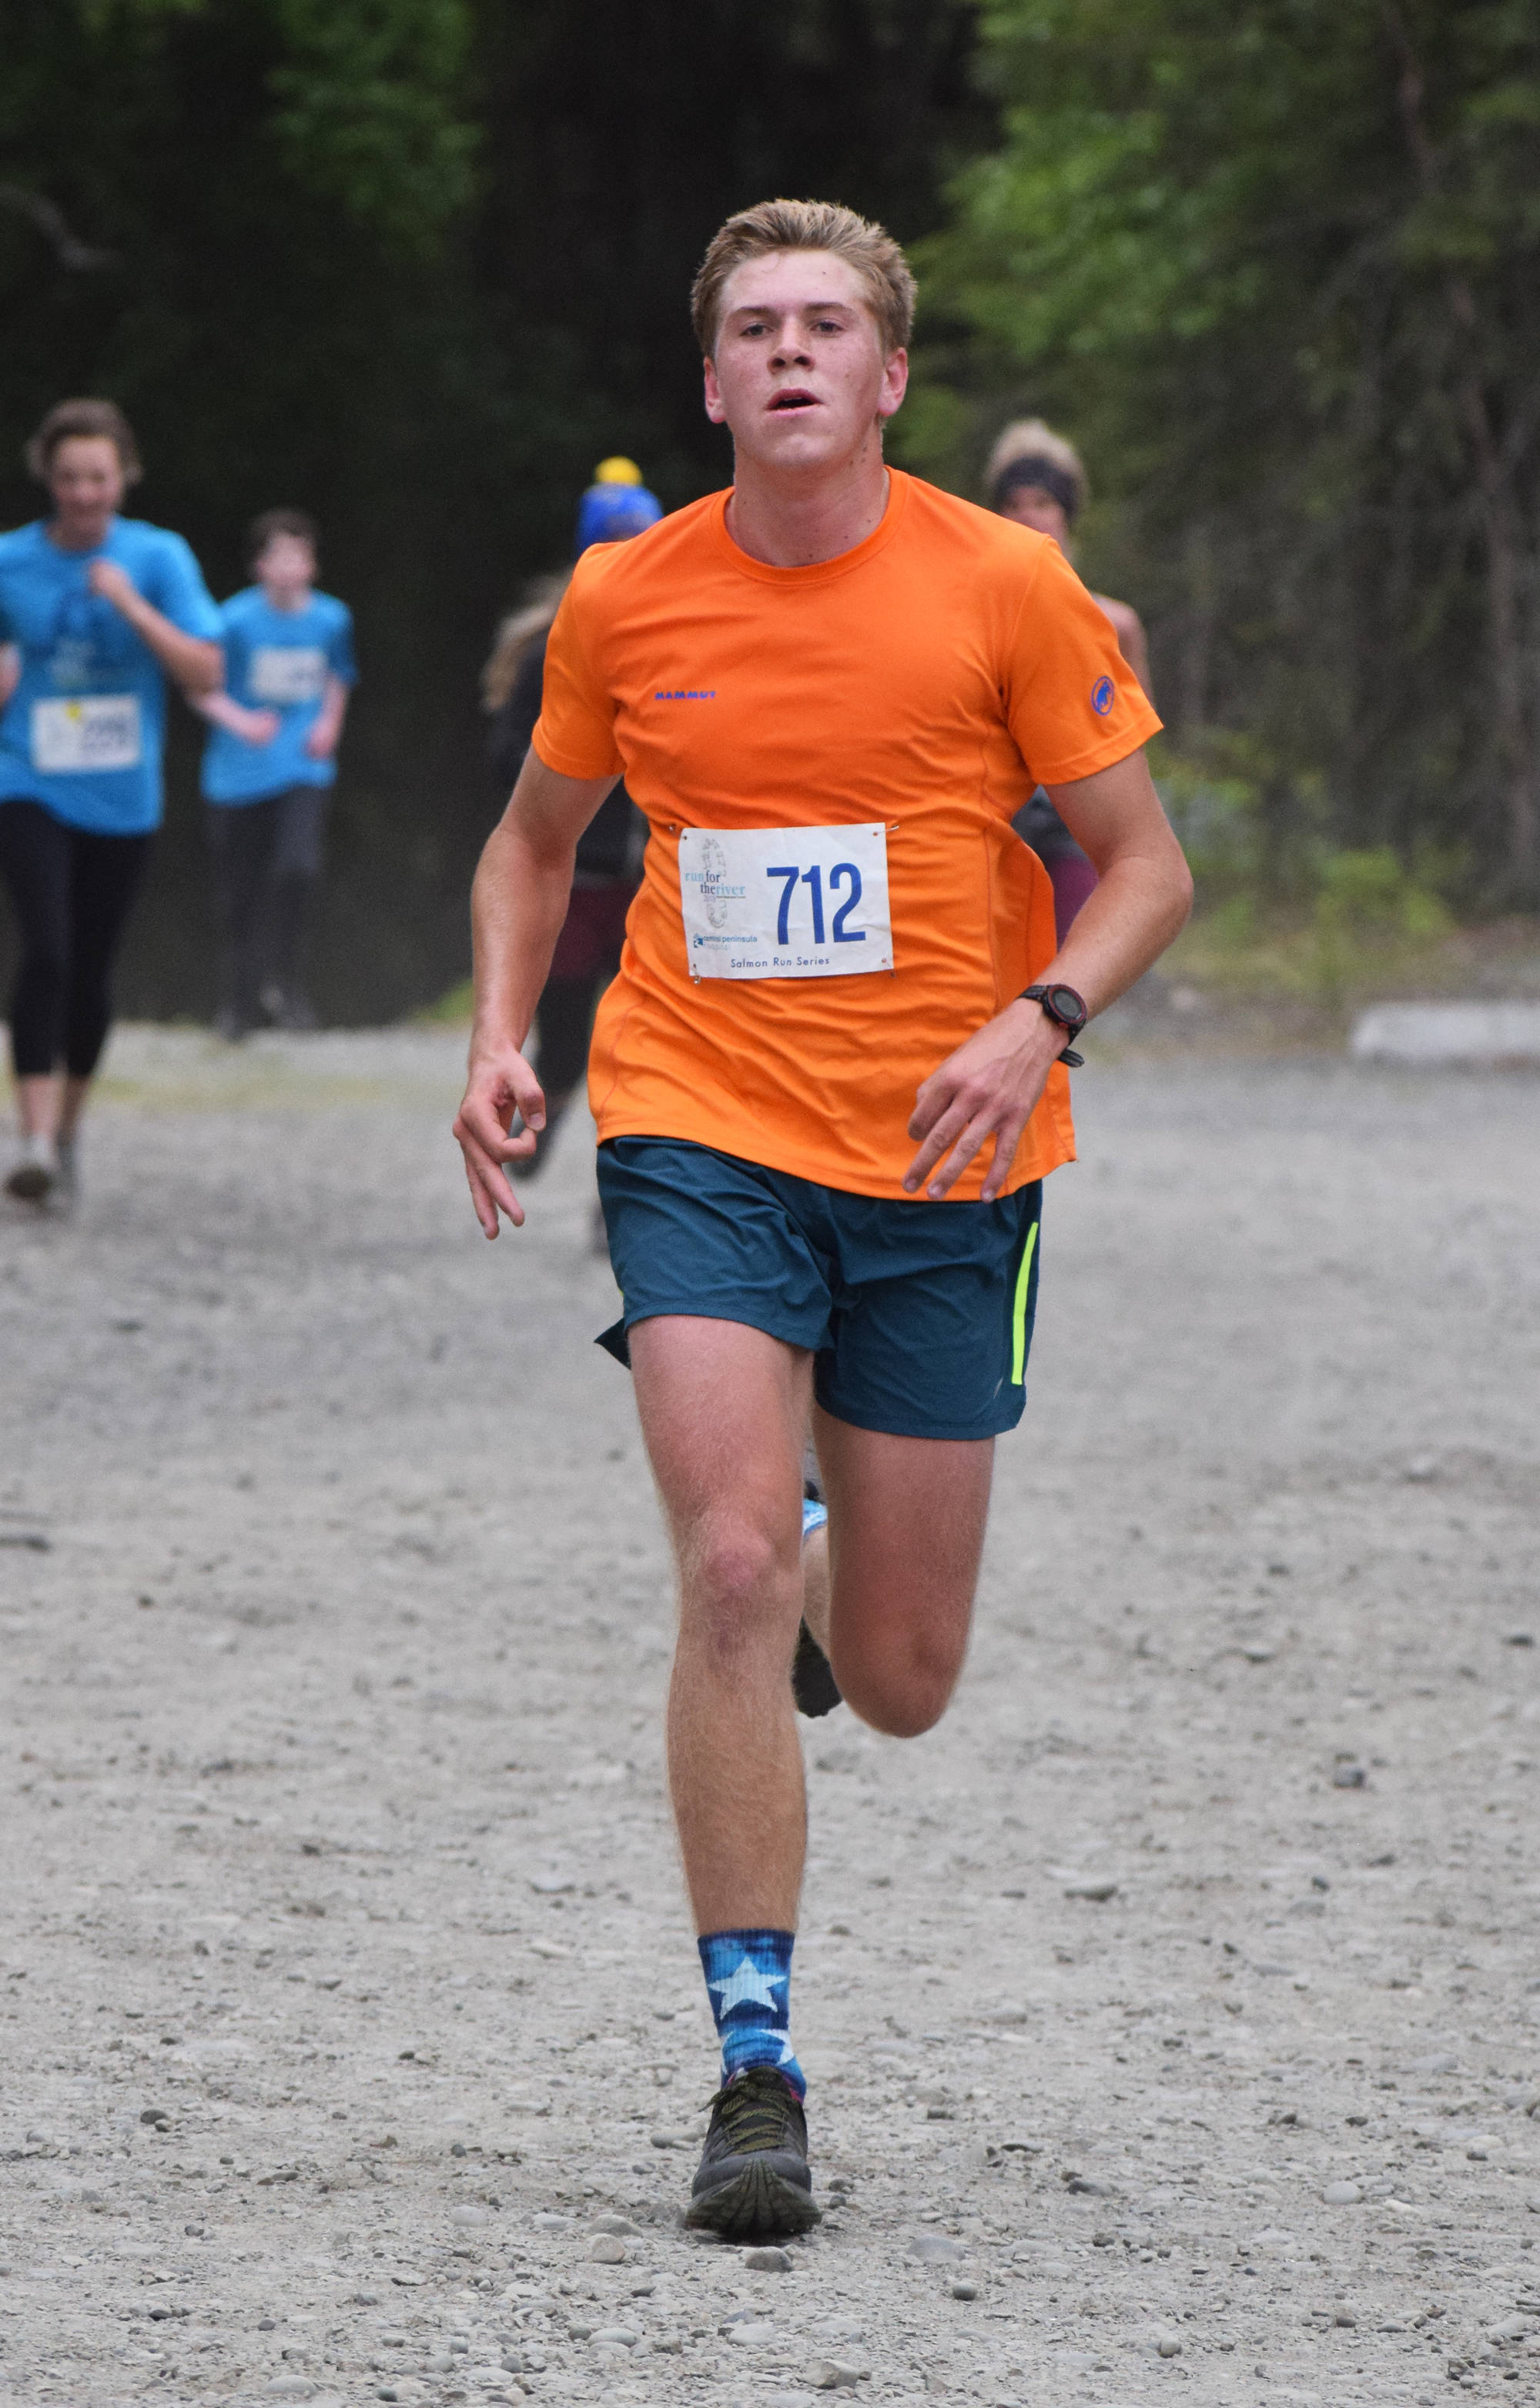 Men’s 10-mile winner Will Steffe approaches the finish line Saturday, June 8, 2019, at the Run for the River 5-kilometer/10-mile races in Soldotna, Alaska. (Photo by Joey Klecka/Peninsula Clarion)